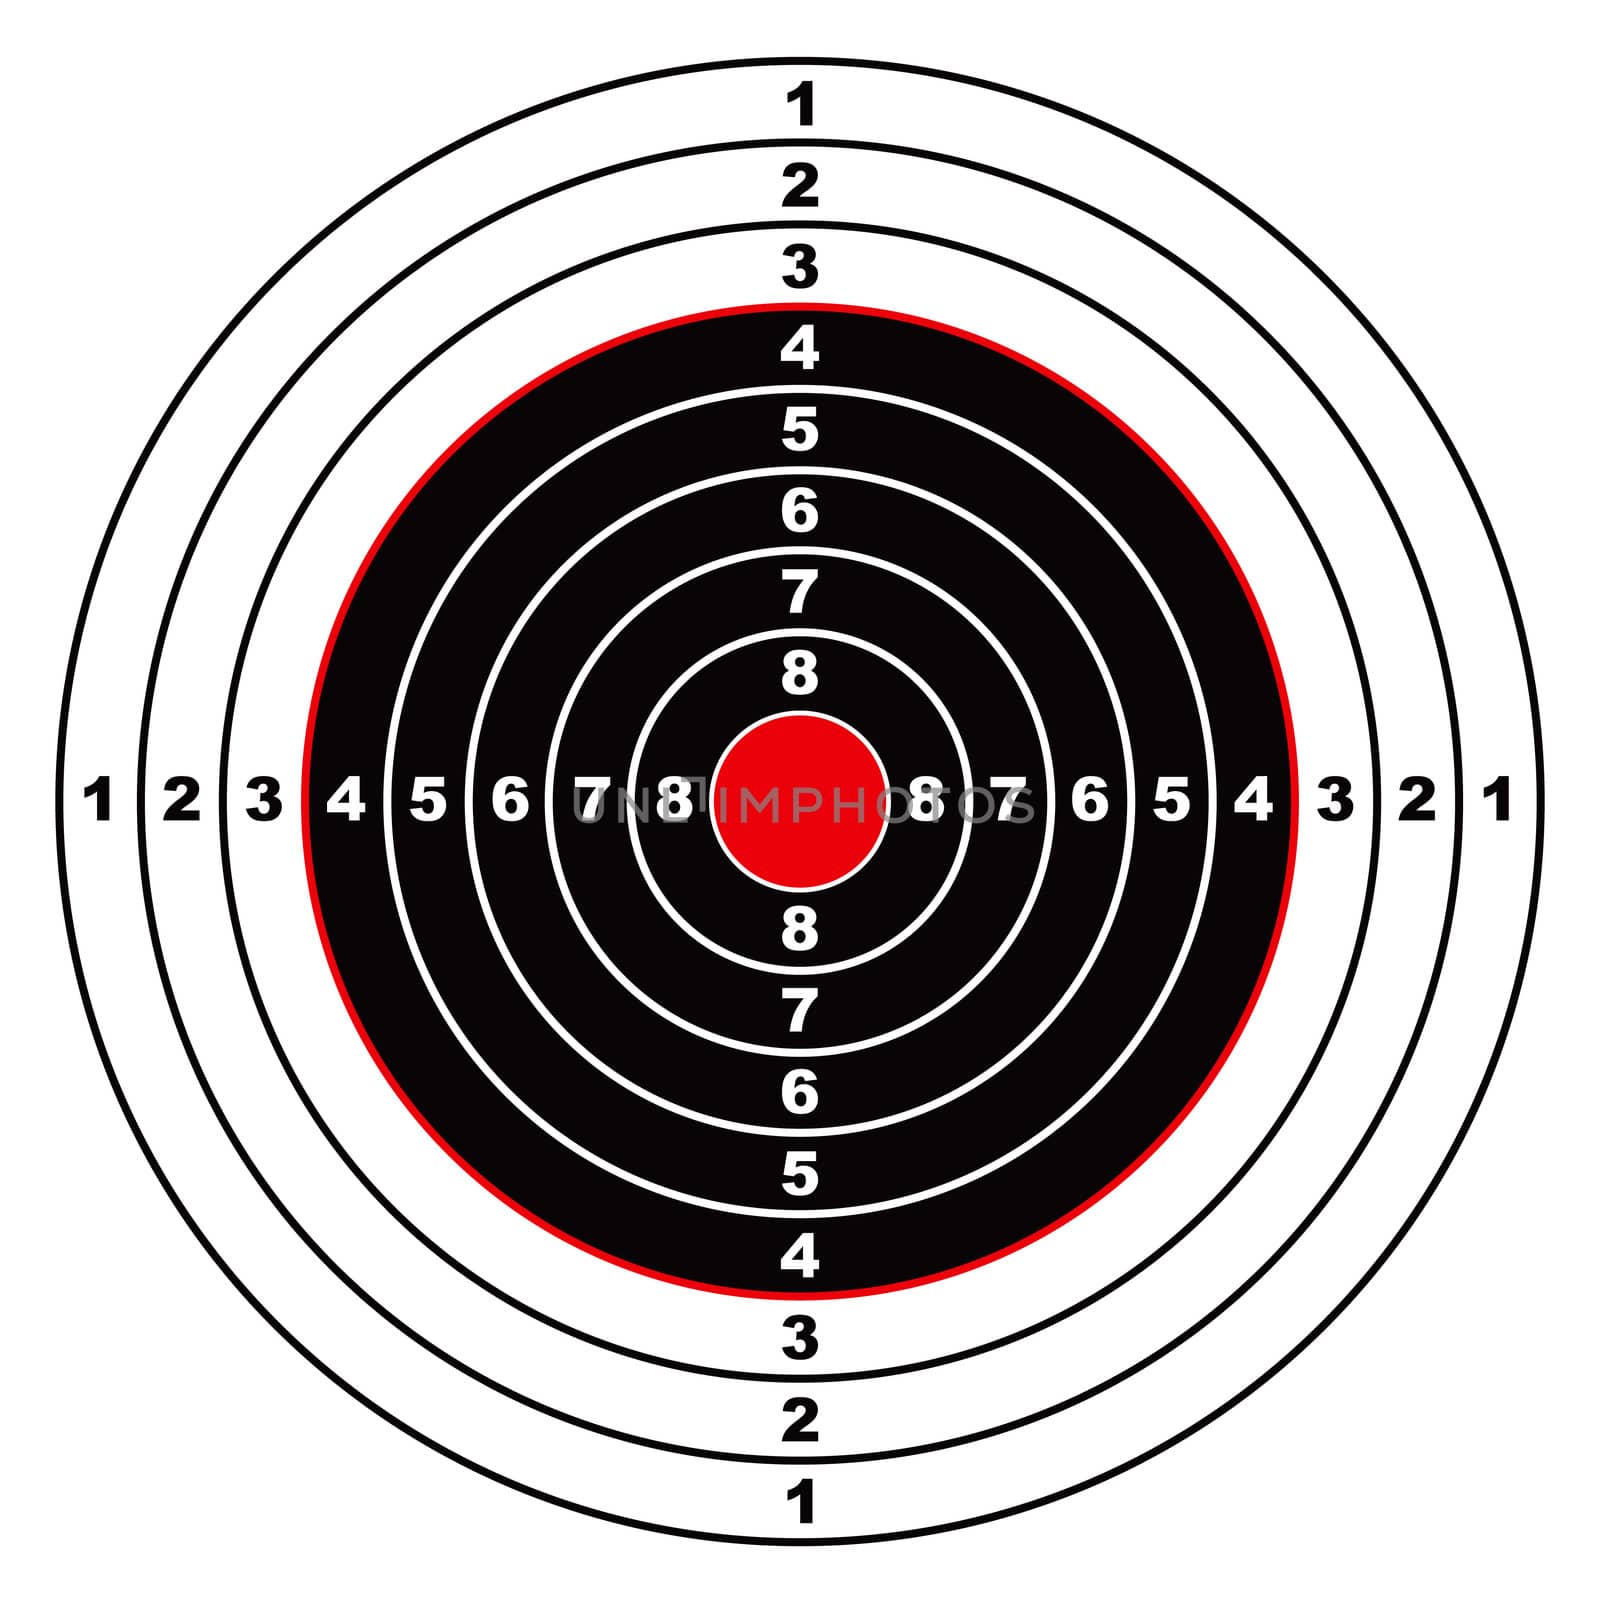 Illustrated rifle target with black sections and points marked on circle